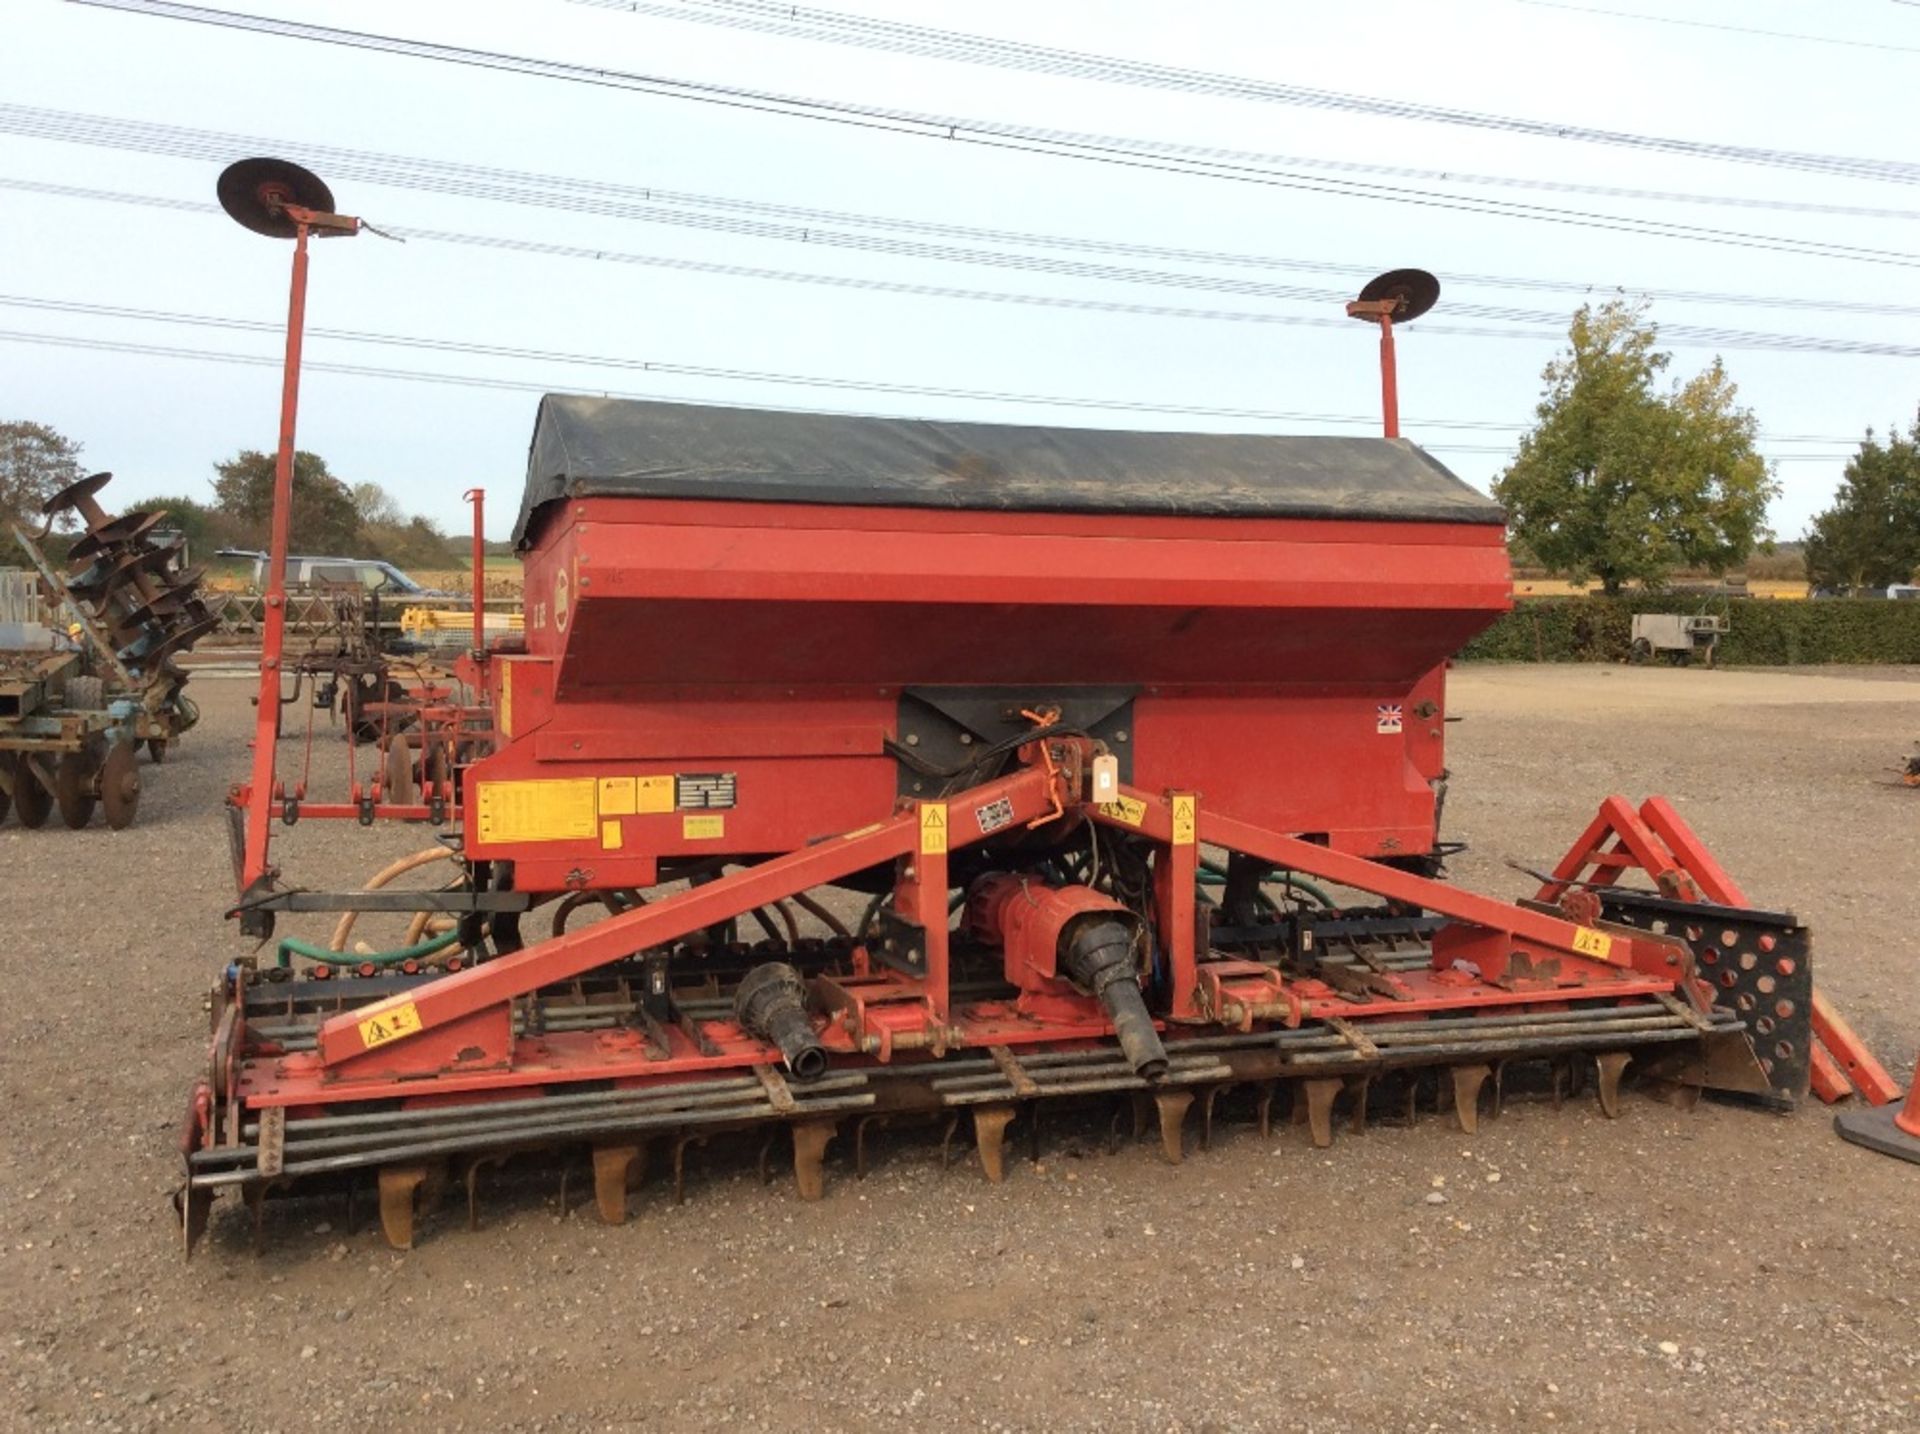 Greenland 4M power harrow. Serial number HOO4149. 1999. With packer. Vendor reports oil leak on